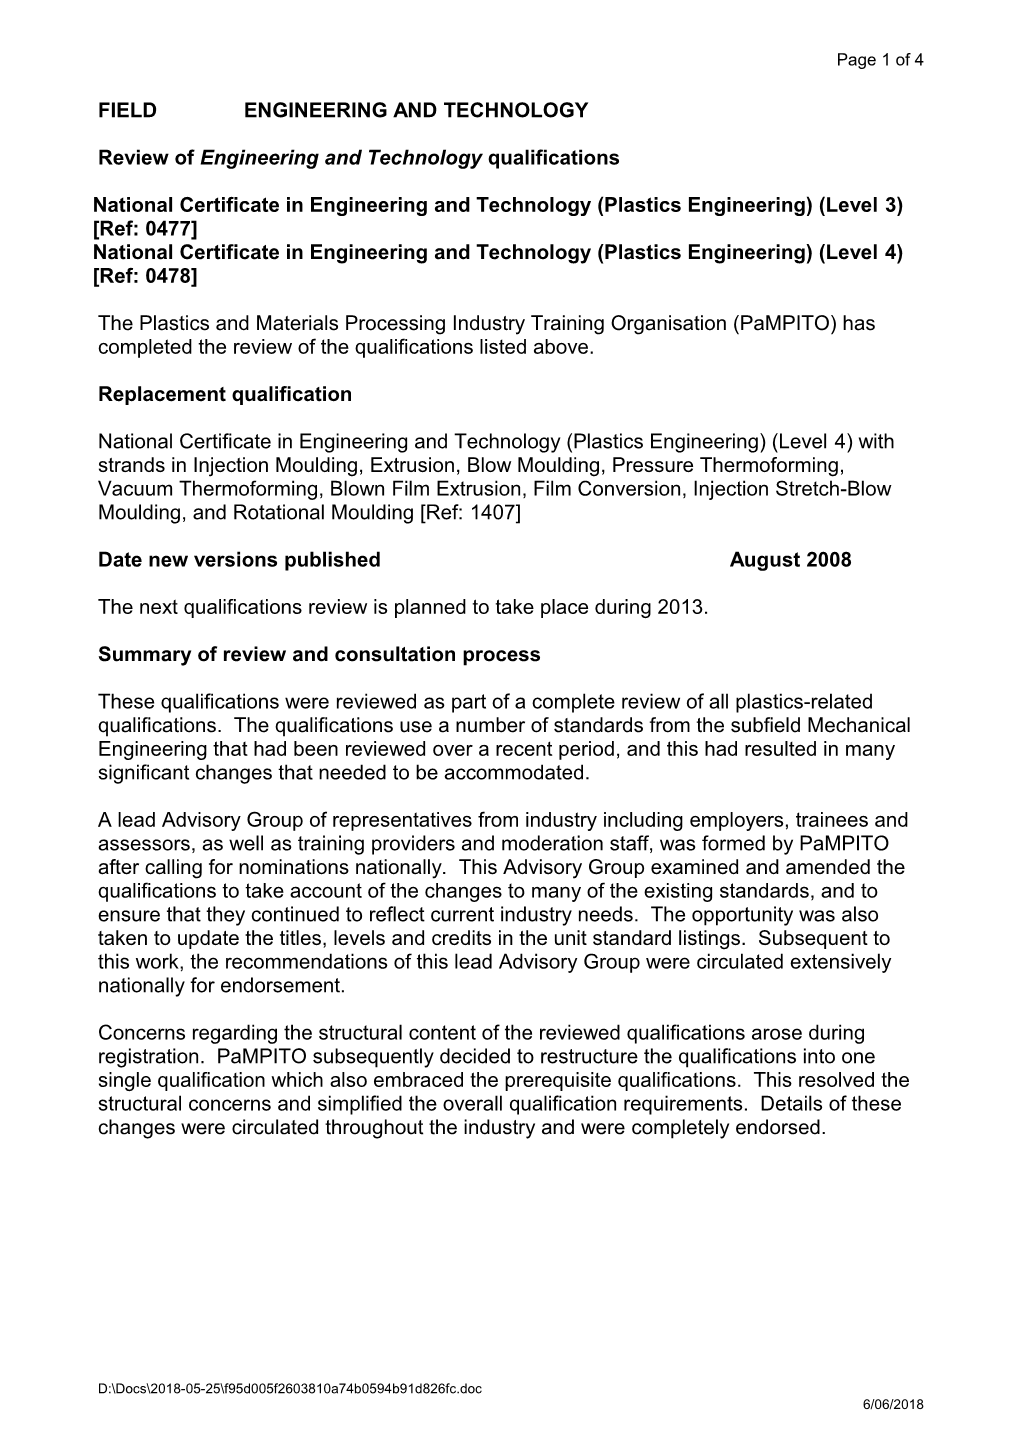 Review of Engineering and Technology Qualifications